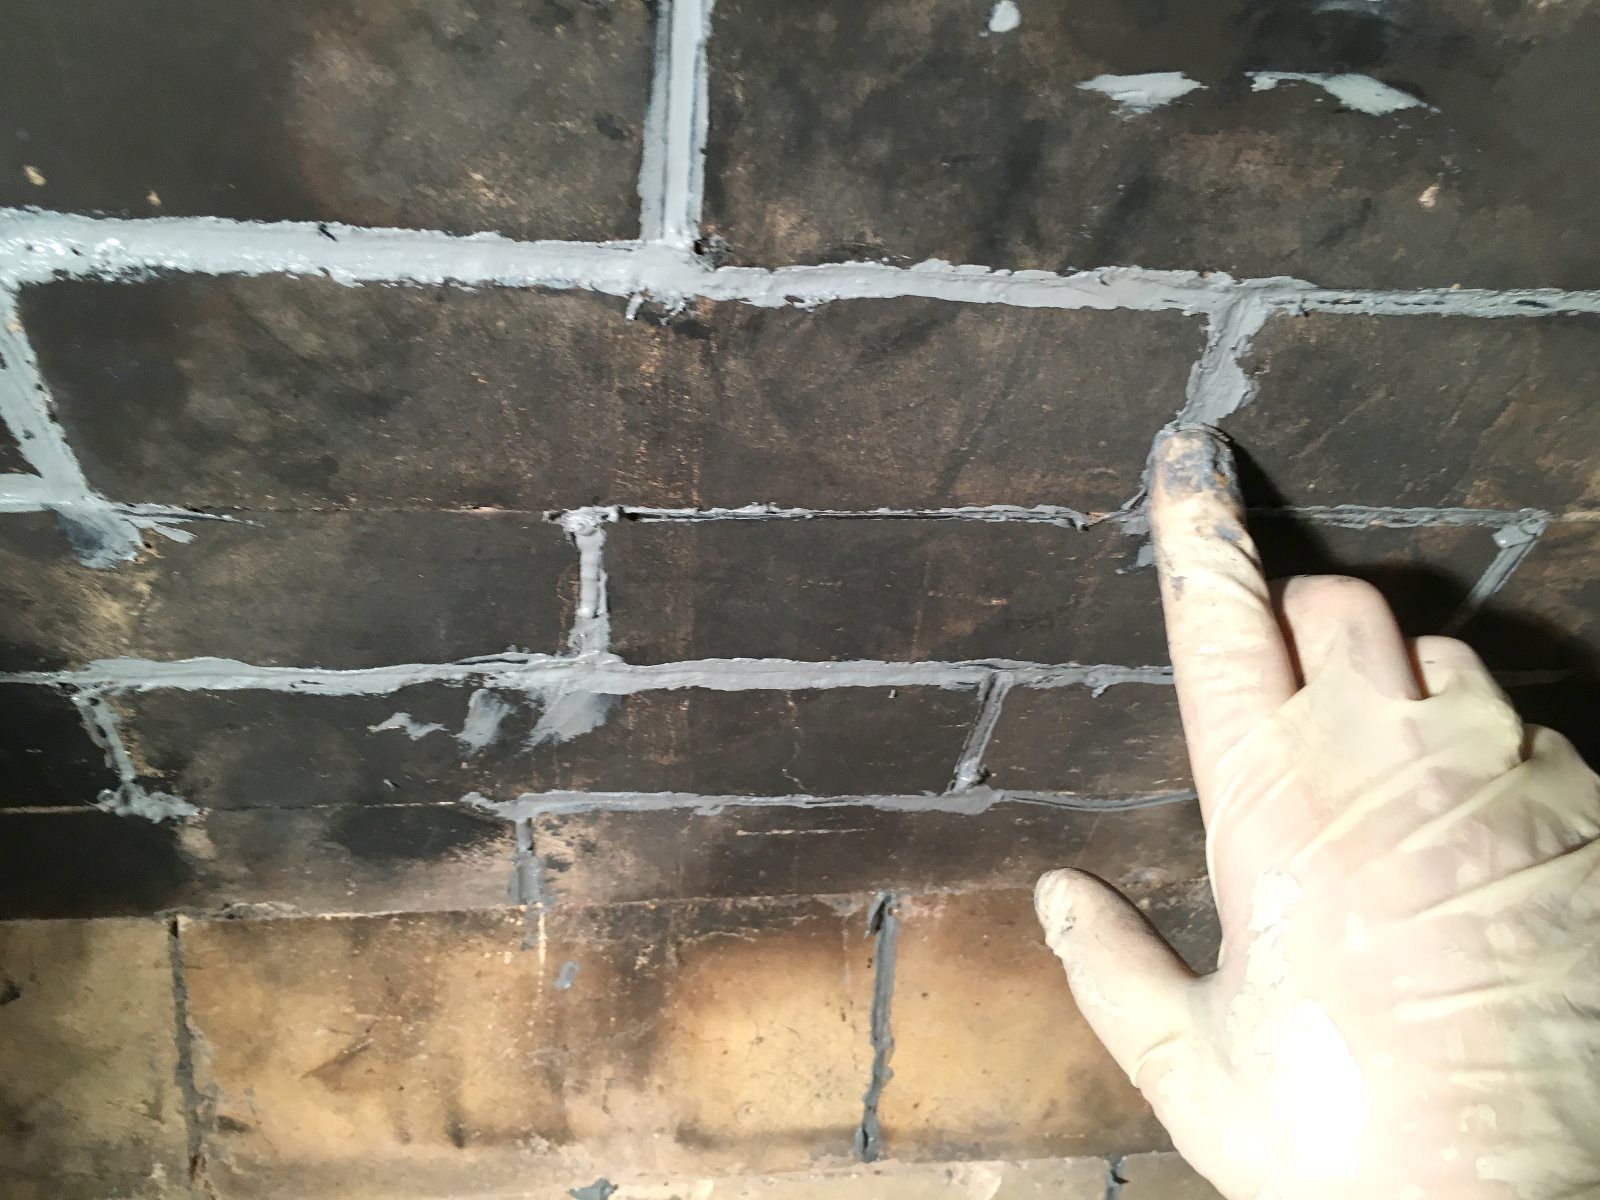 Learn how to easily fix mortar gaps or holes in between fire brick joints in your fireplace to prevent house fires.